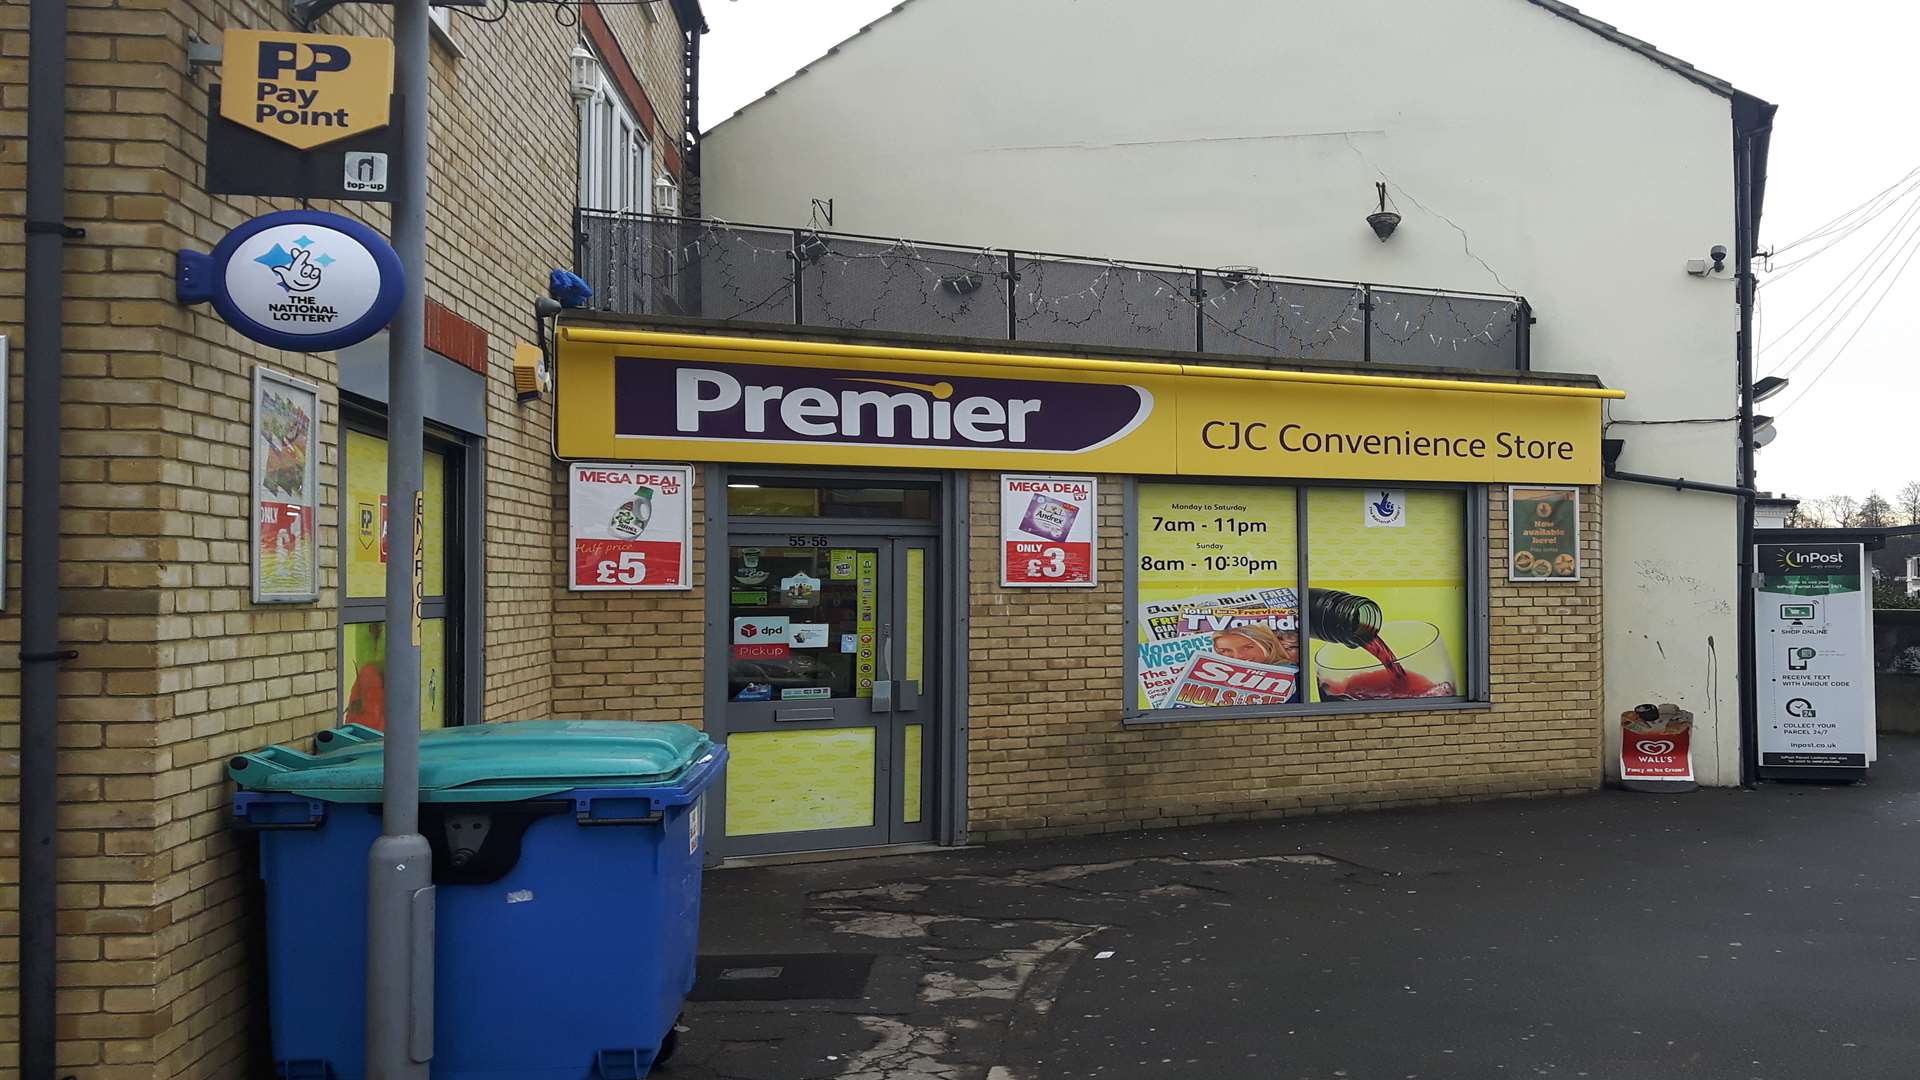 Staff at the CJC Convenience Store fought off a robber armed with a plank of wood